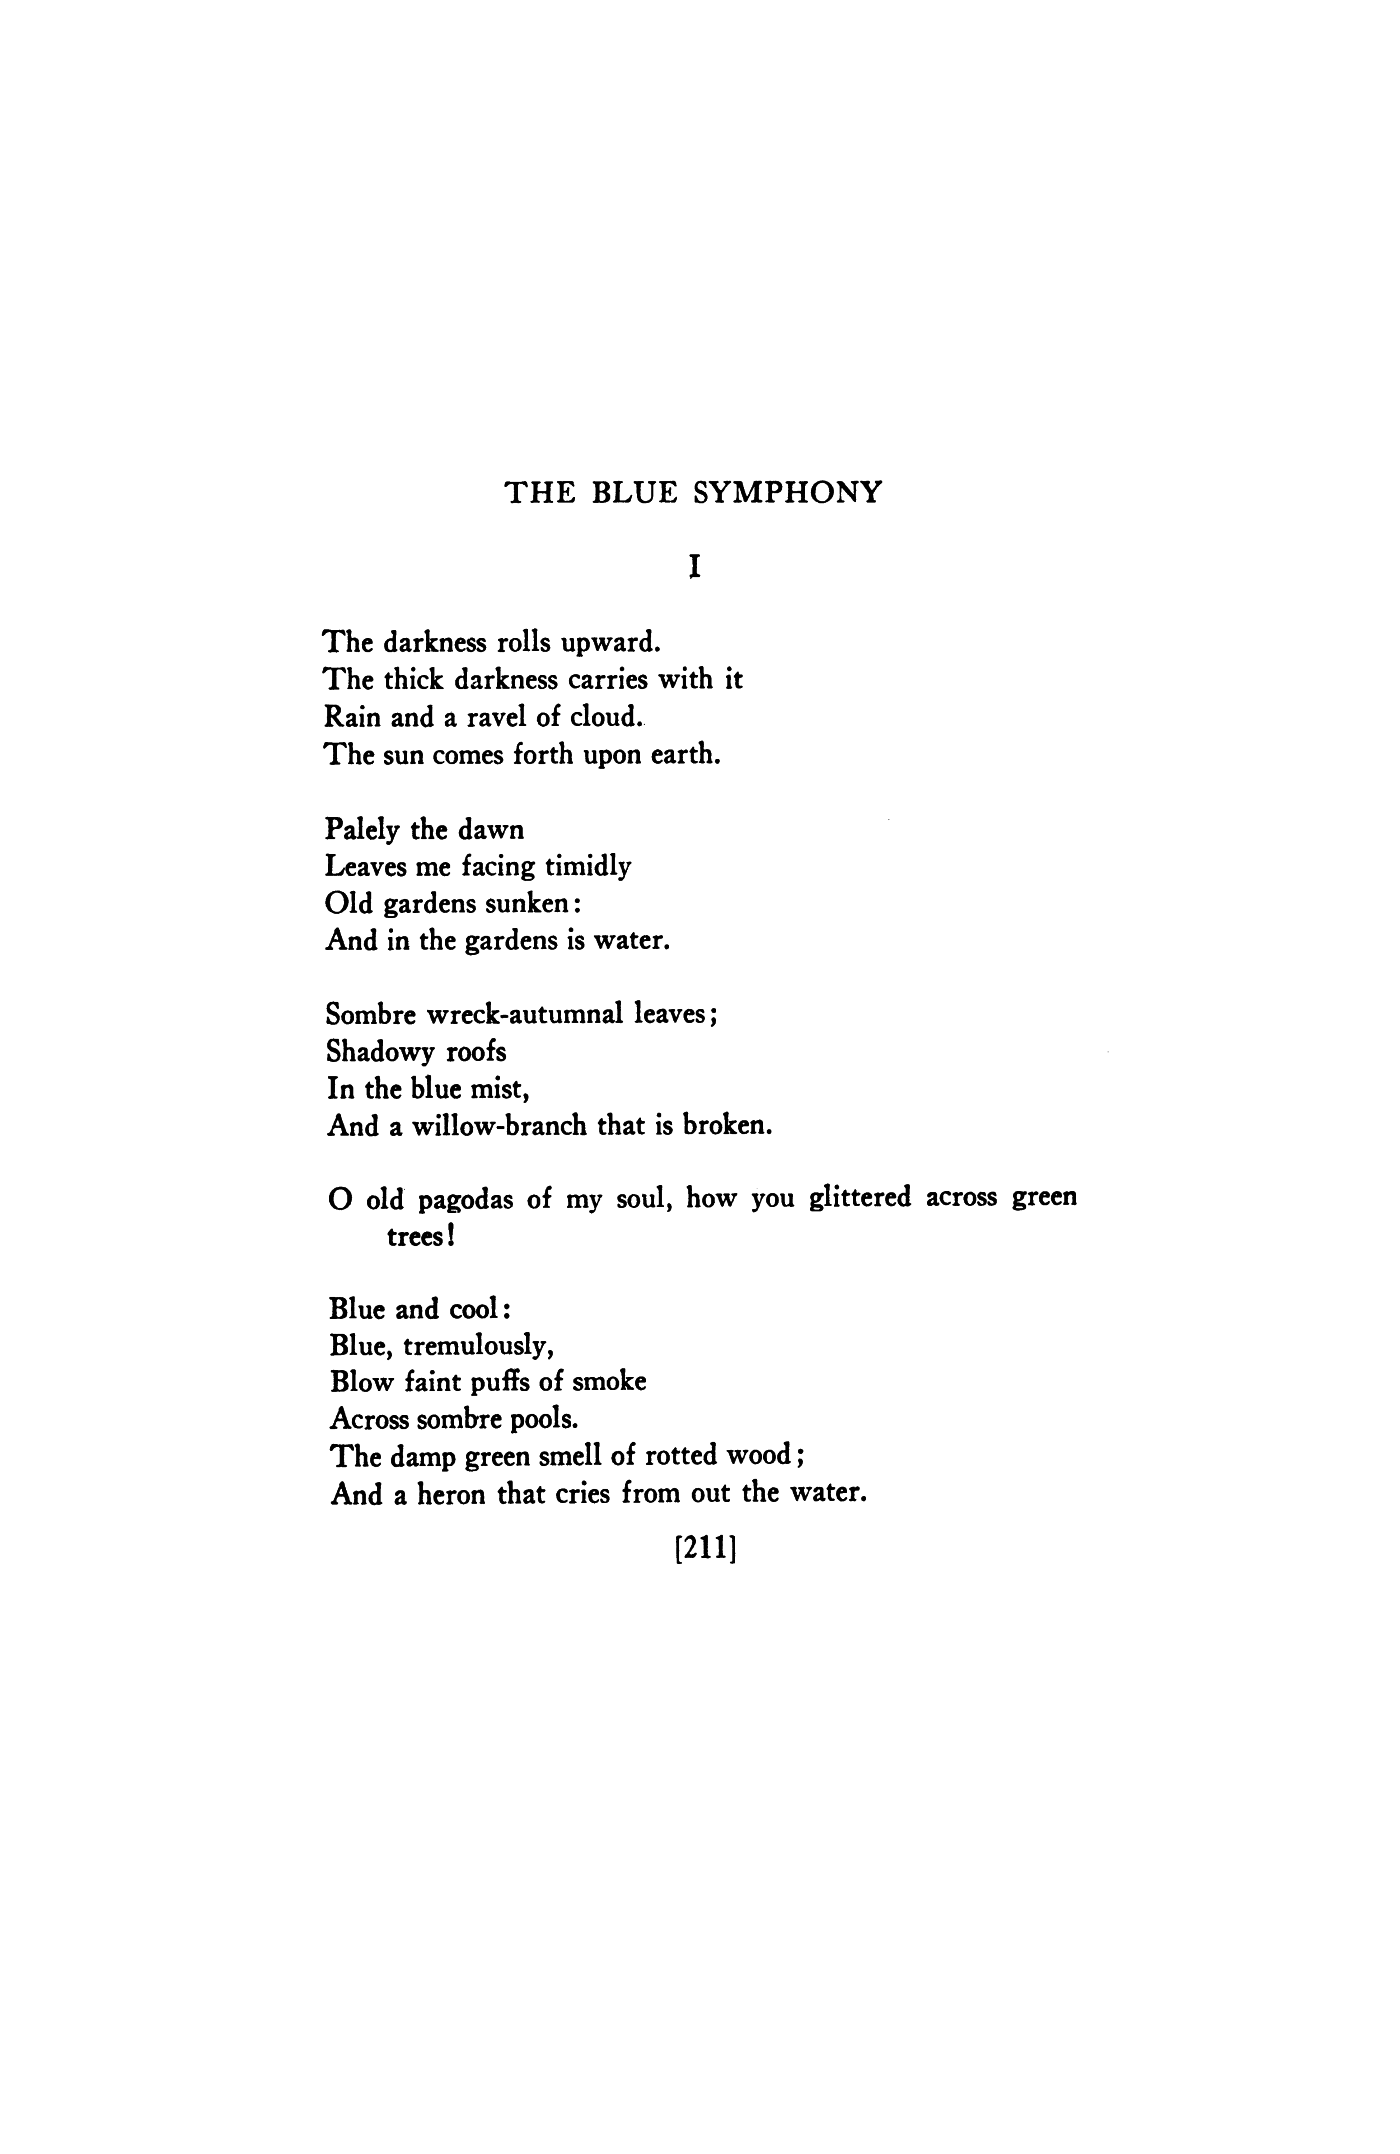 https://static.poetryfoundation.org/jstor/i20570133/pages/5.png